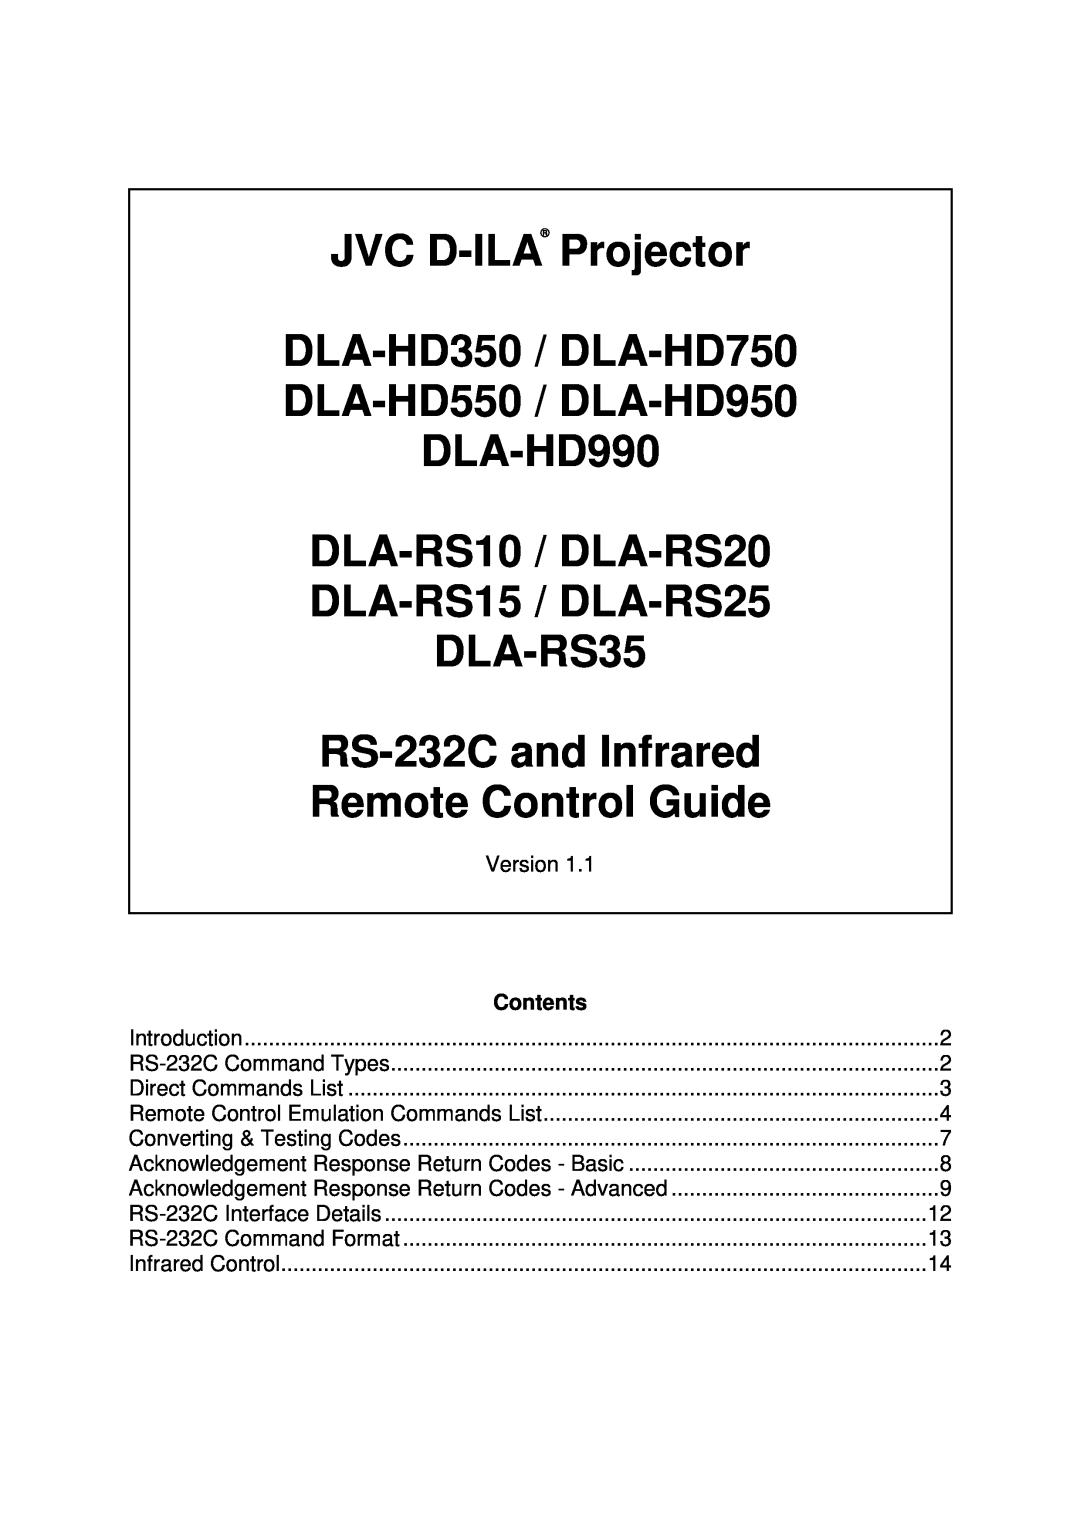 JVC manual JVC D-ILA Projector, RS-232C, LAN, and Infrared, Remote Control Guide, DLA-HD350 DLA-HD750, Contents 